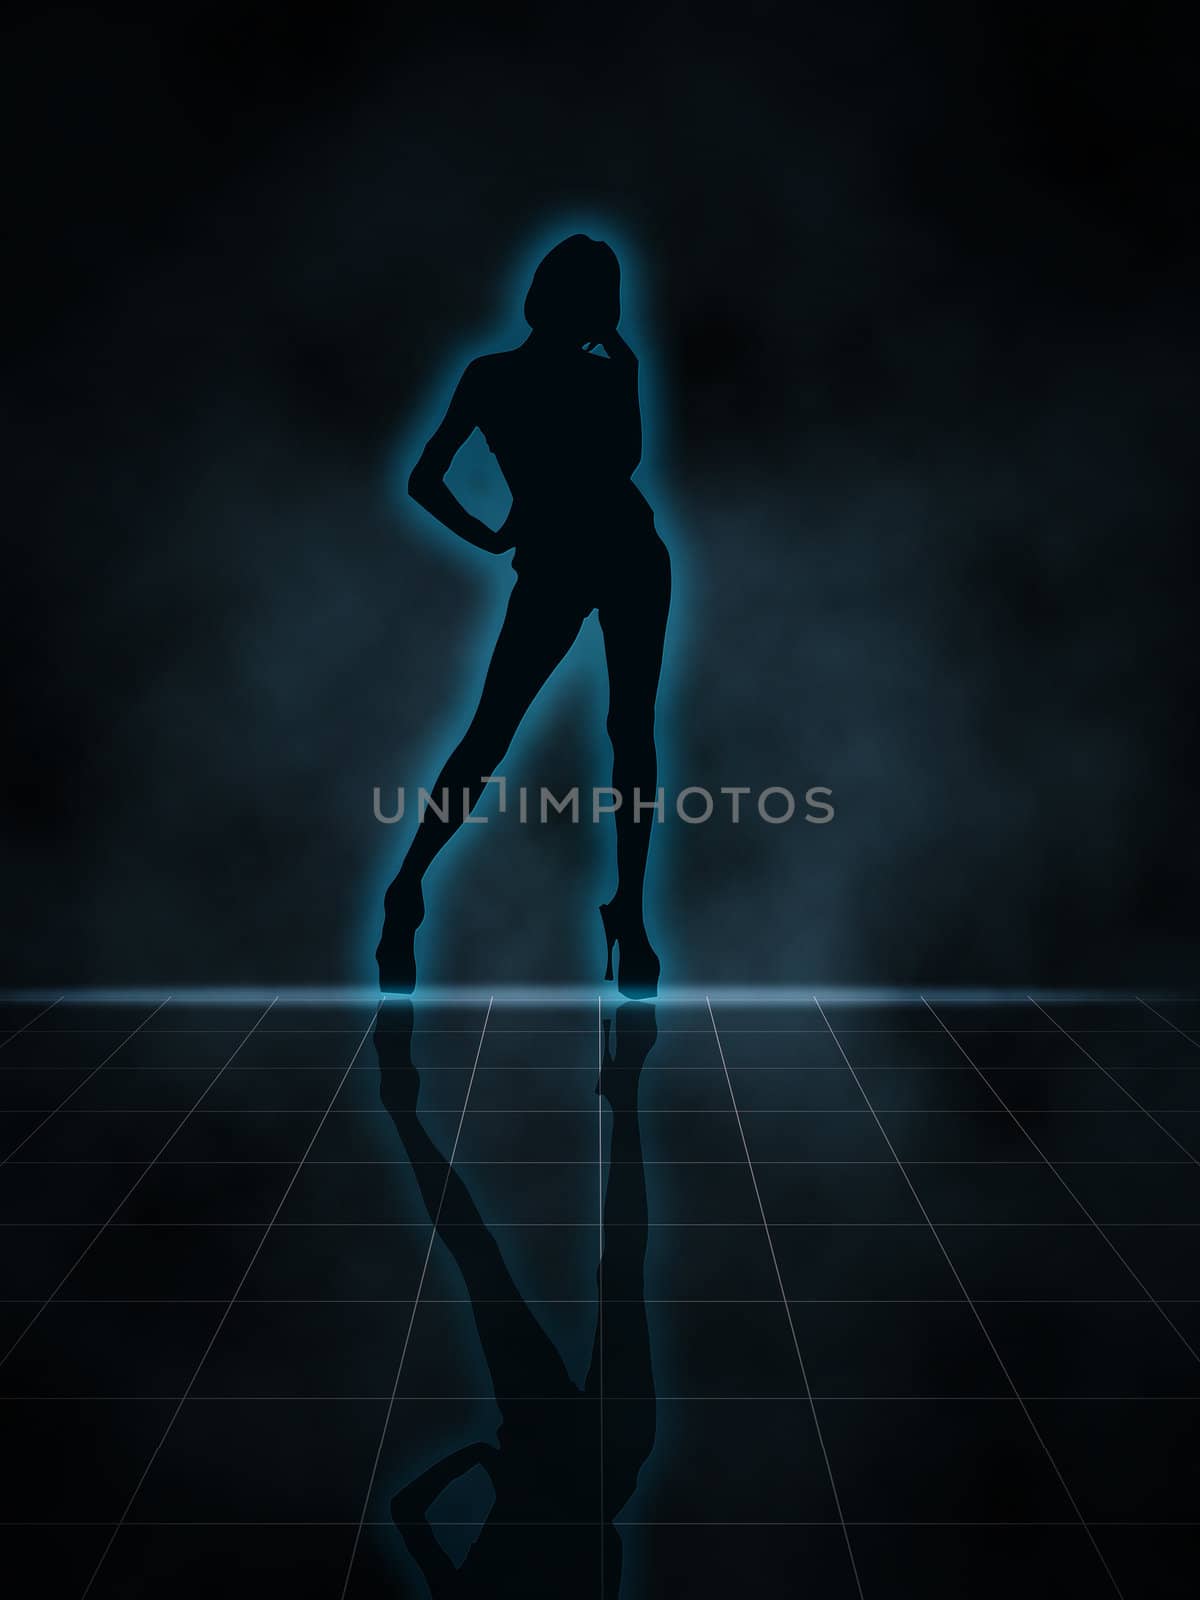 Illustration of a woman glowing silhouette on black background